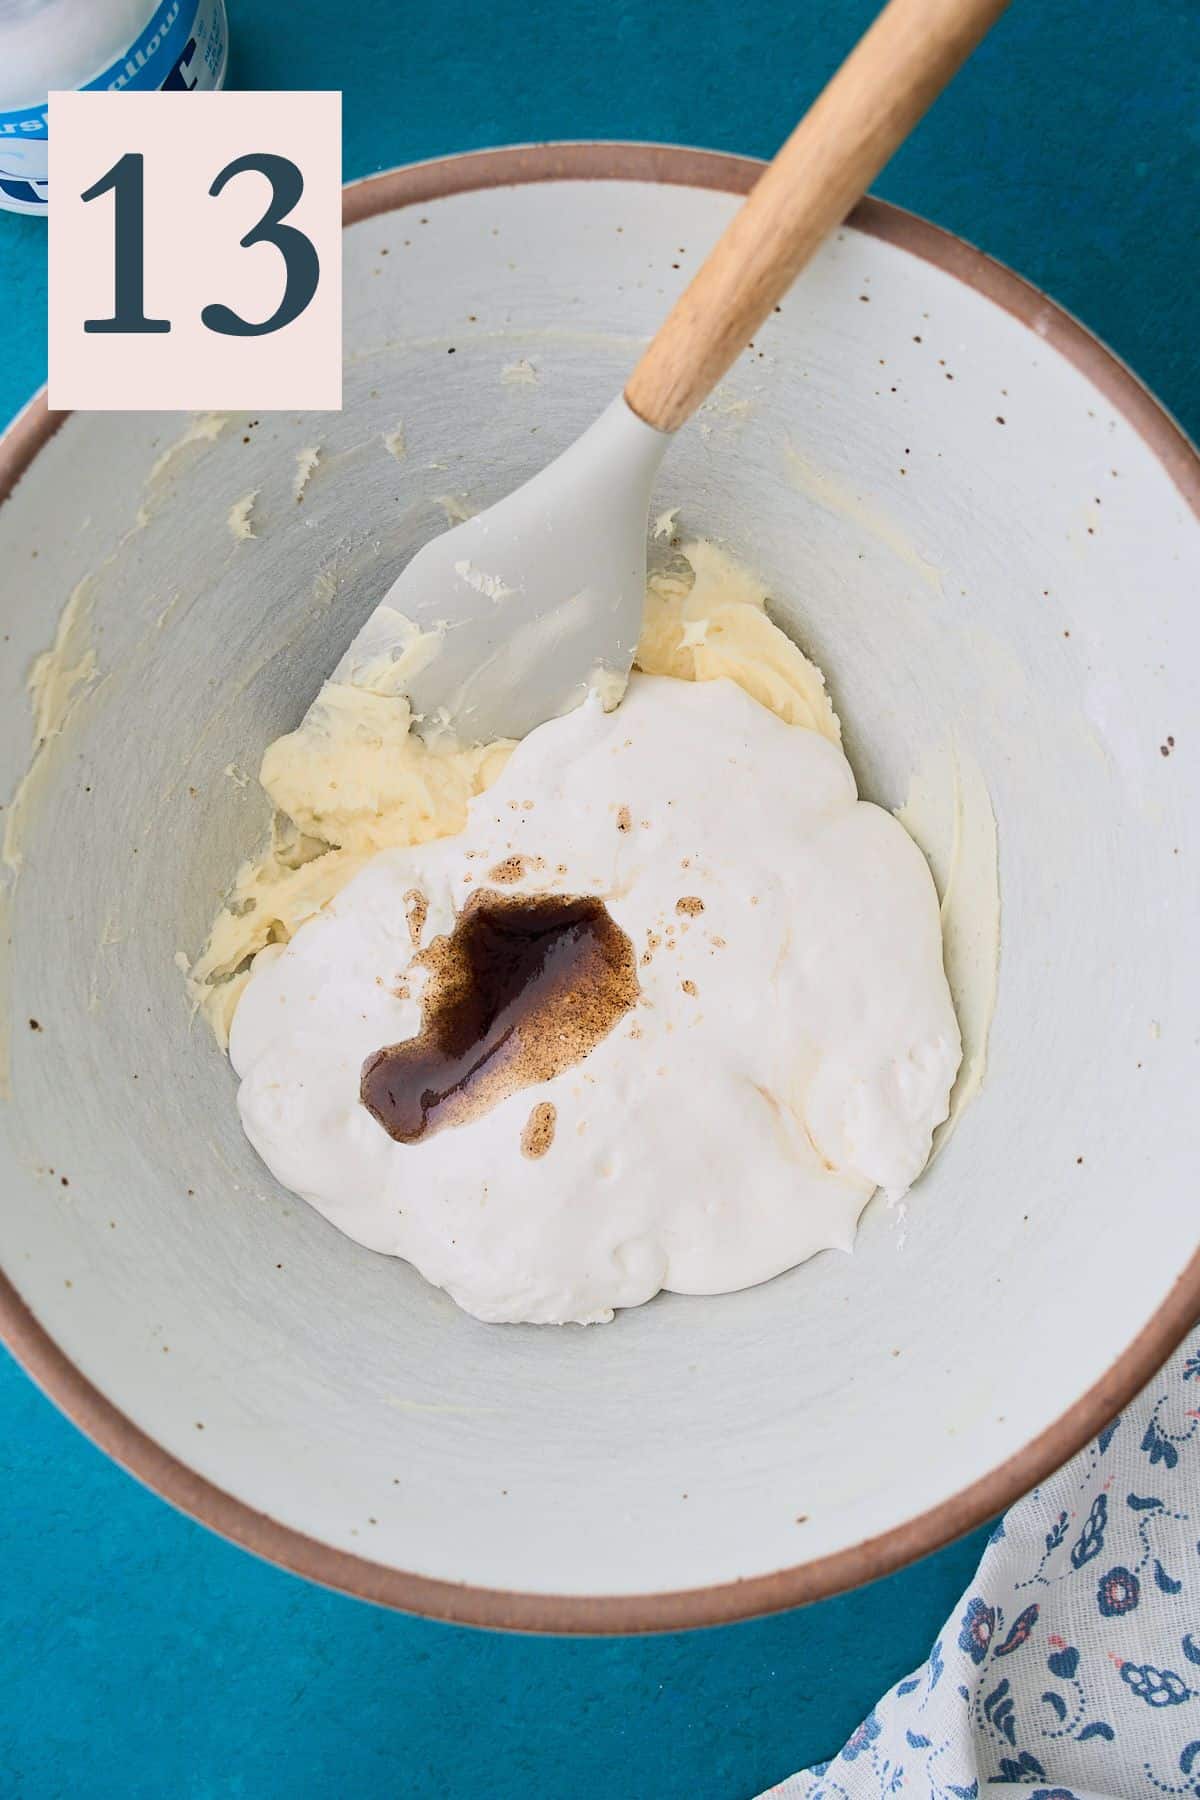 Marshmallow fluff and vanilla bean extract added to a mixing bowl to make frosting.